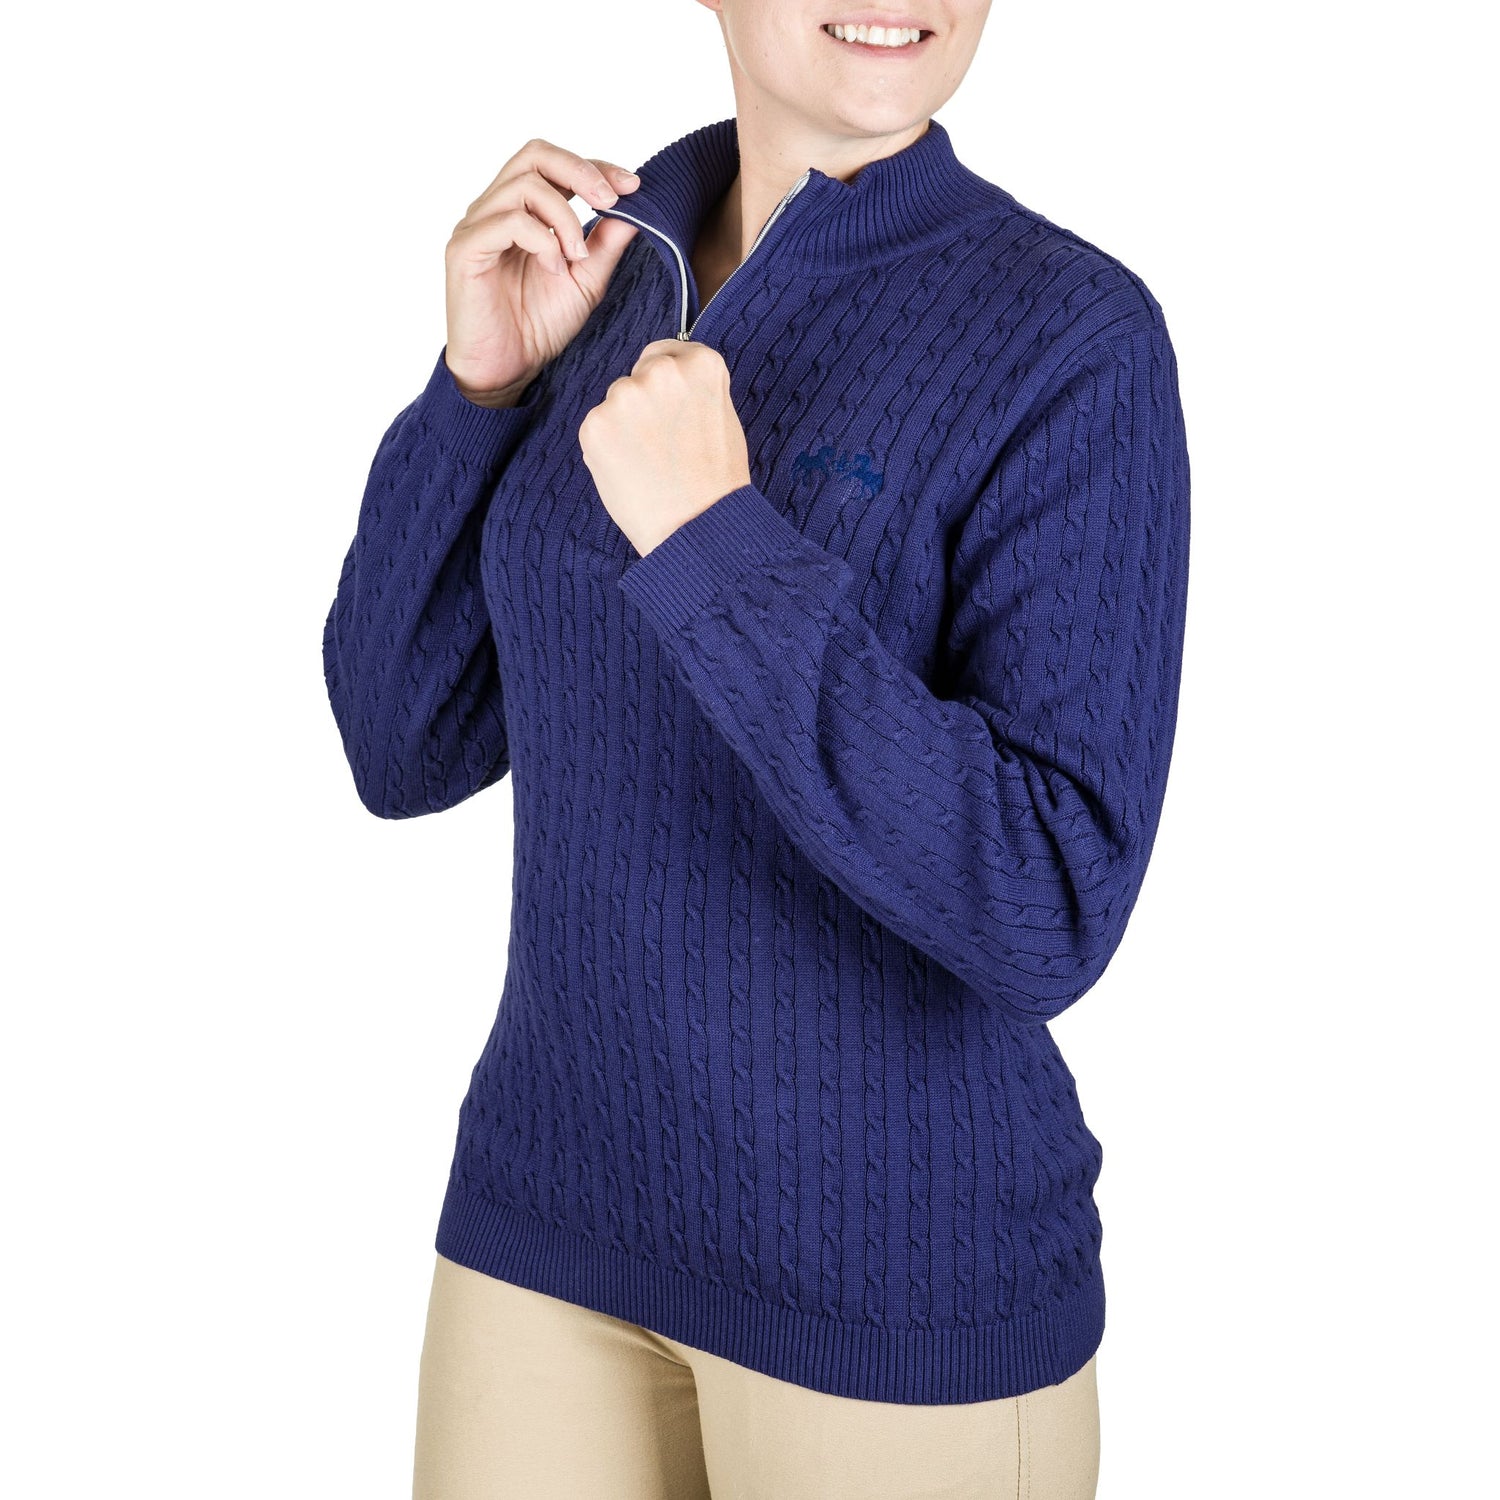 Equine Couture Ladies Zara Cable Knit Sweater - Breeches.com